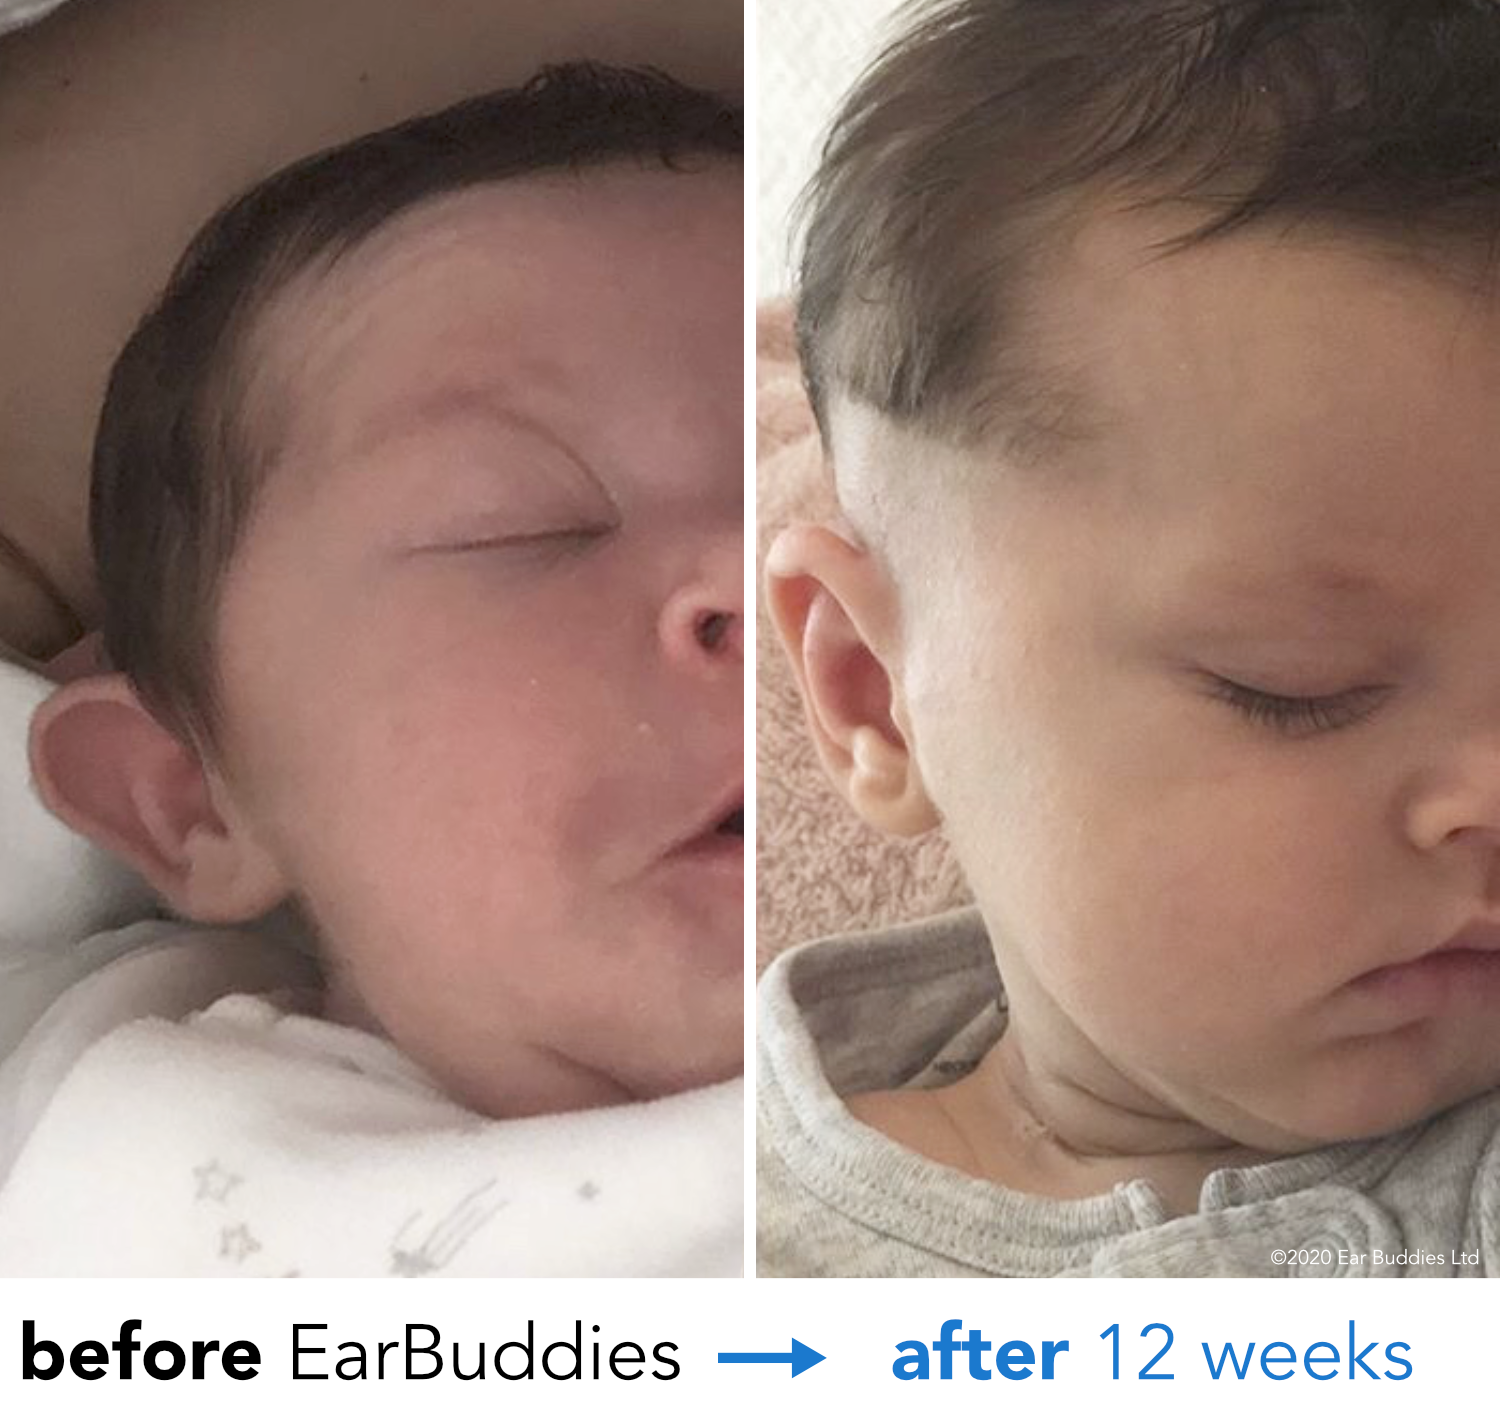 Baby Ears Stick Out Review of EarBuddies